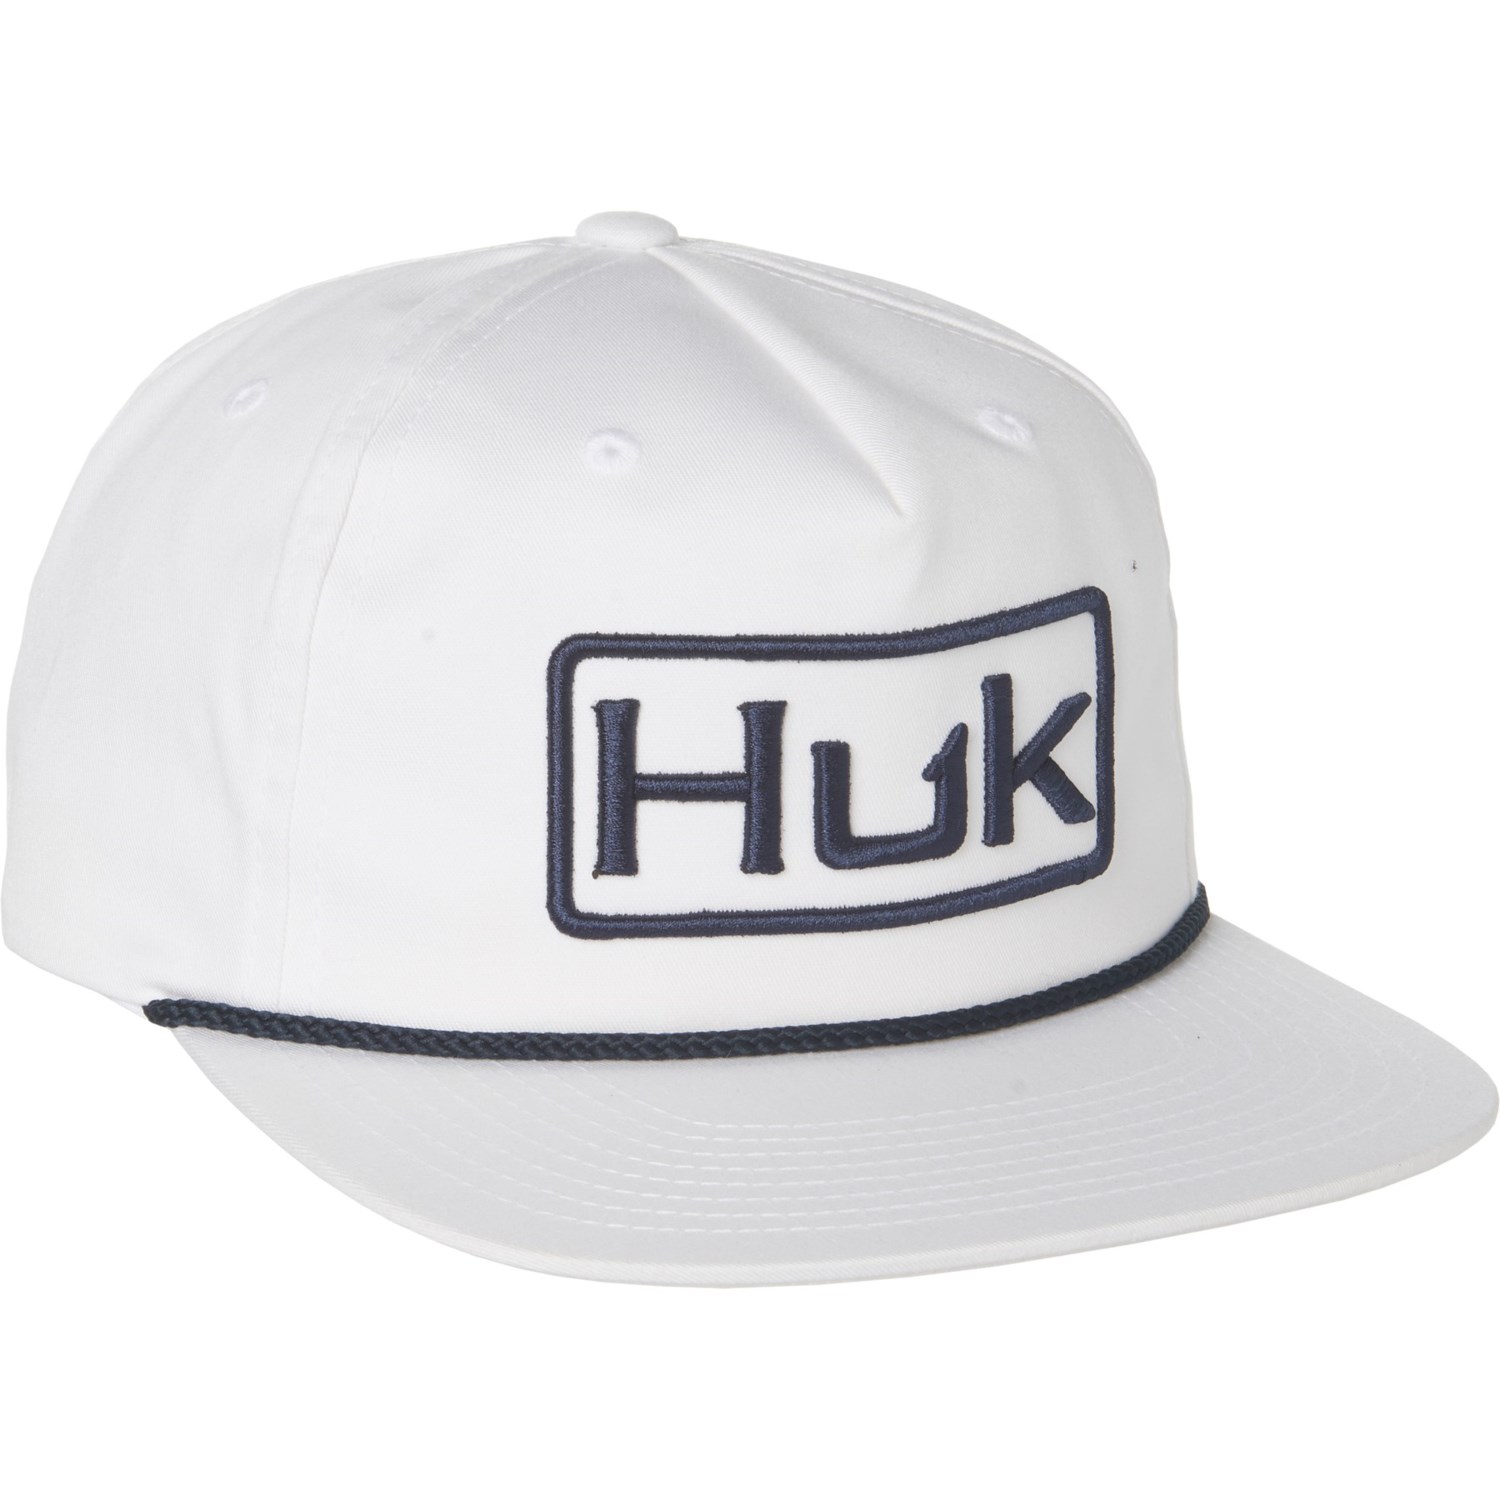 Huk Hats and Accessories: UV Protection, Comfort & Great Looks